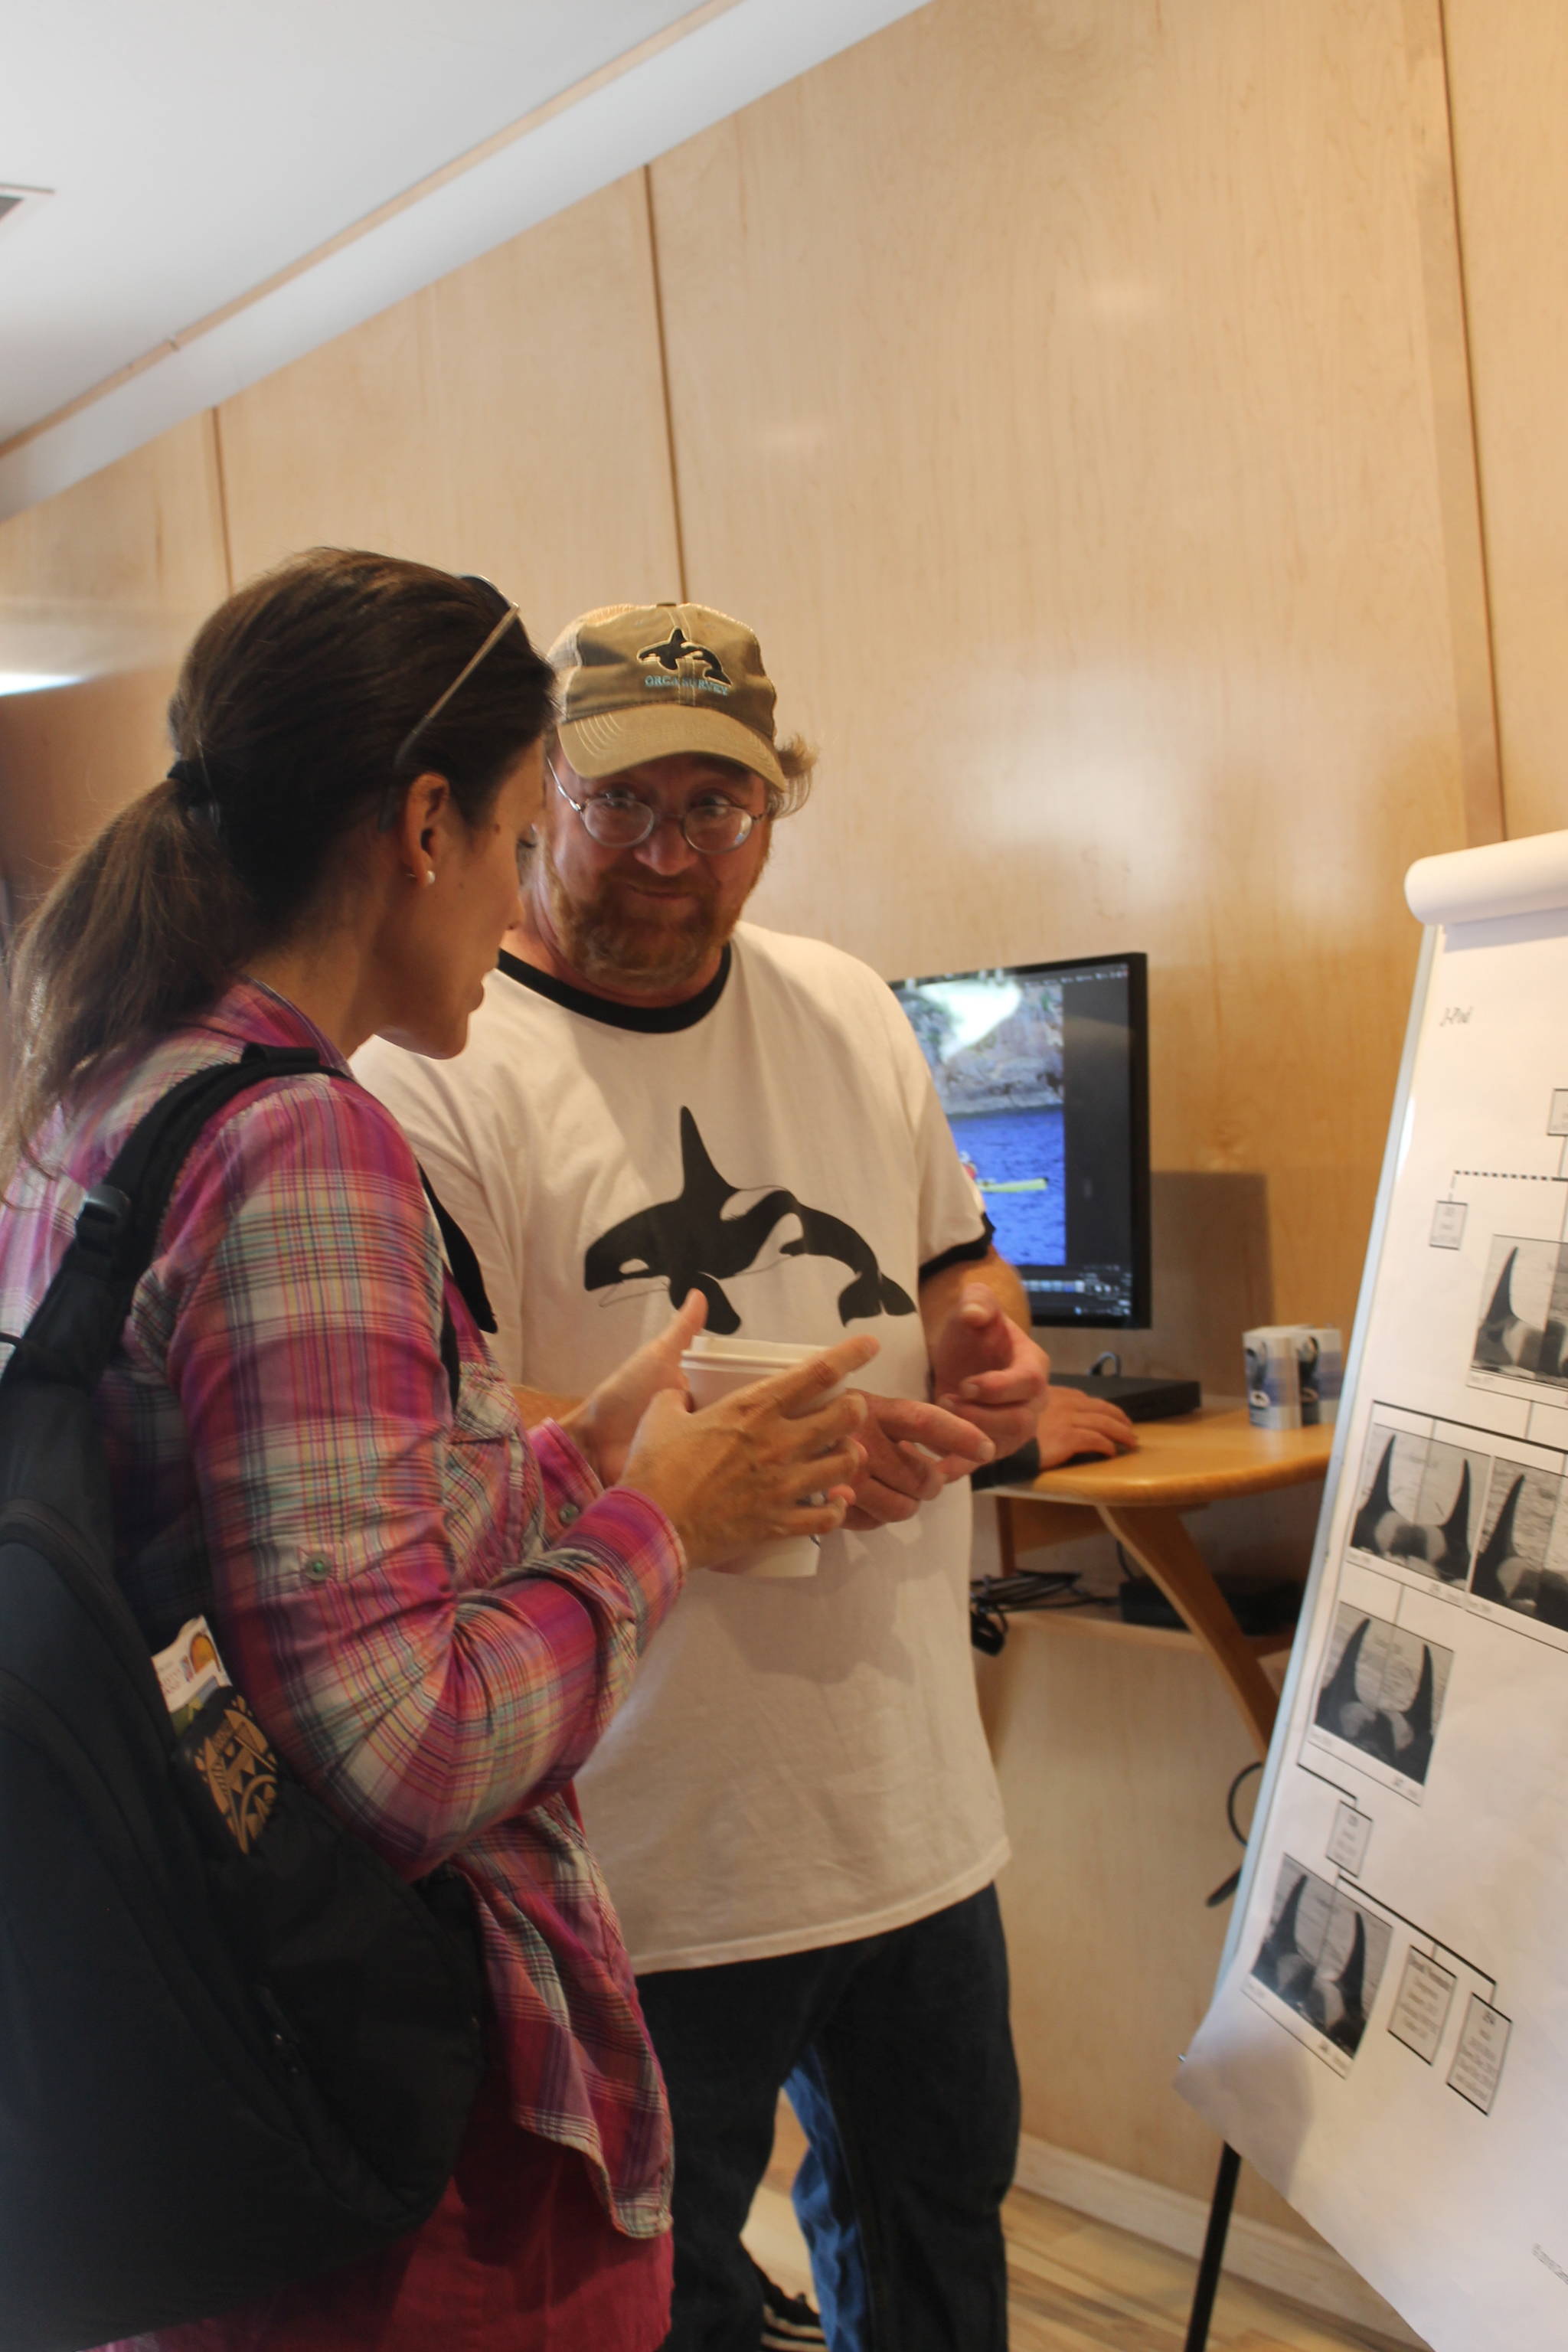 Staff photo/Heather Spaulding. Dave Ellifrit, photo ID specialist talks with a visitor about Orca IDing.